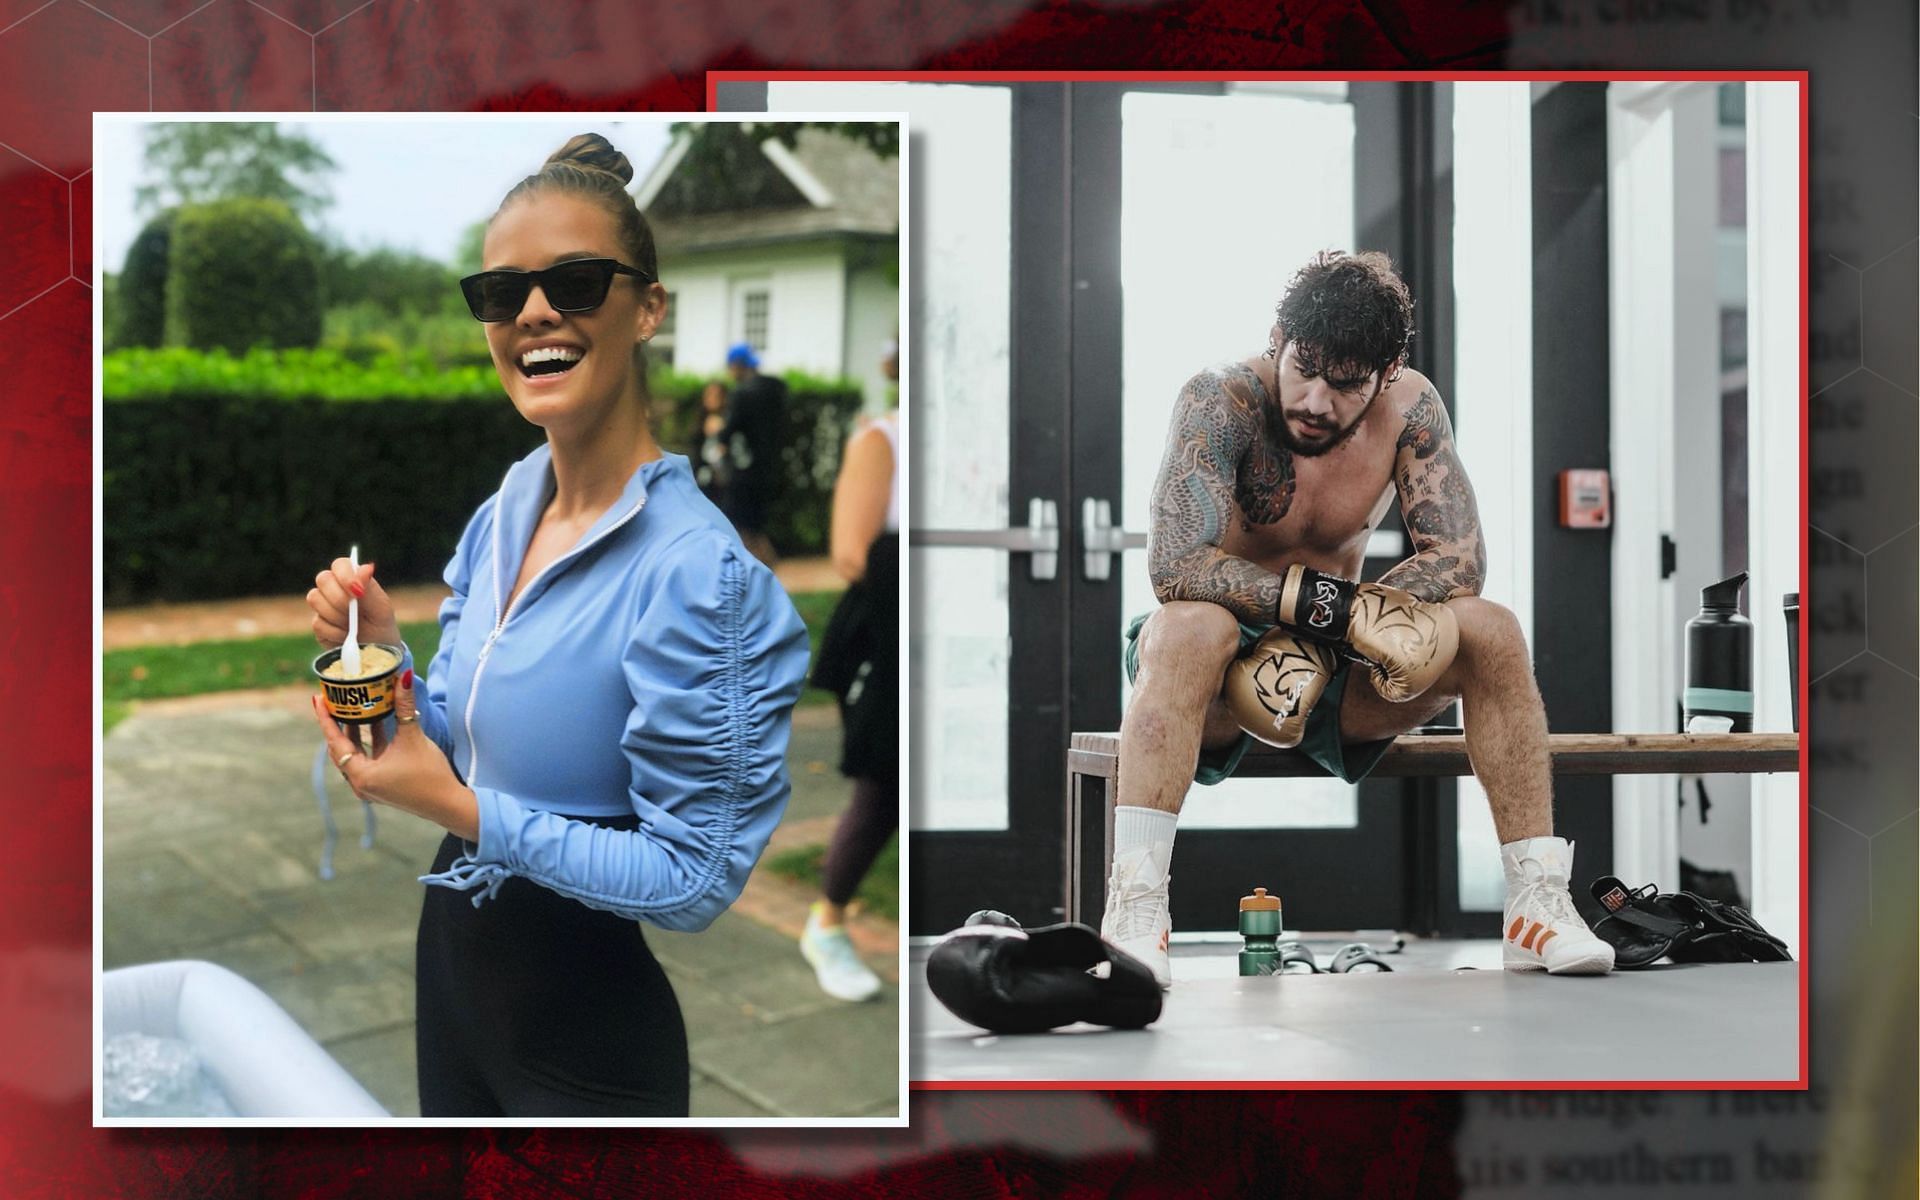 Dillon Danis faces consequences after no-show at recent hearing. [Image credits: @dillondanis and @ninaagdal on Instagram]